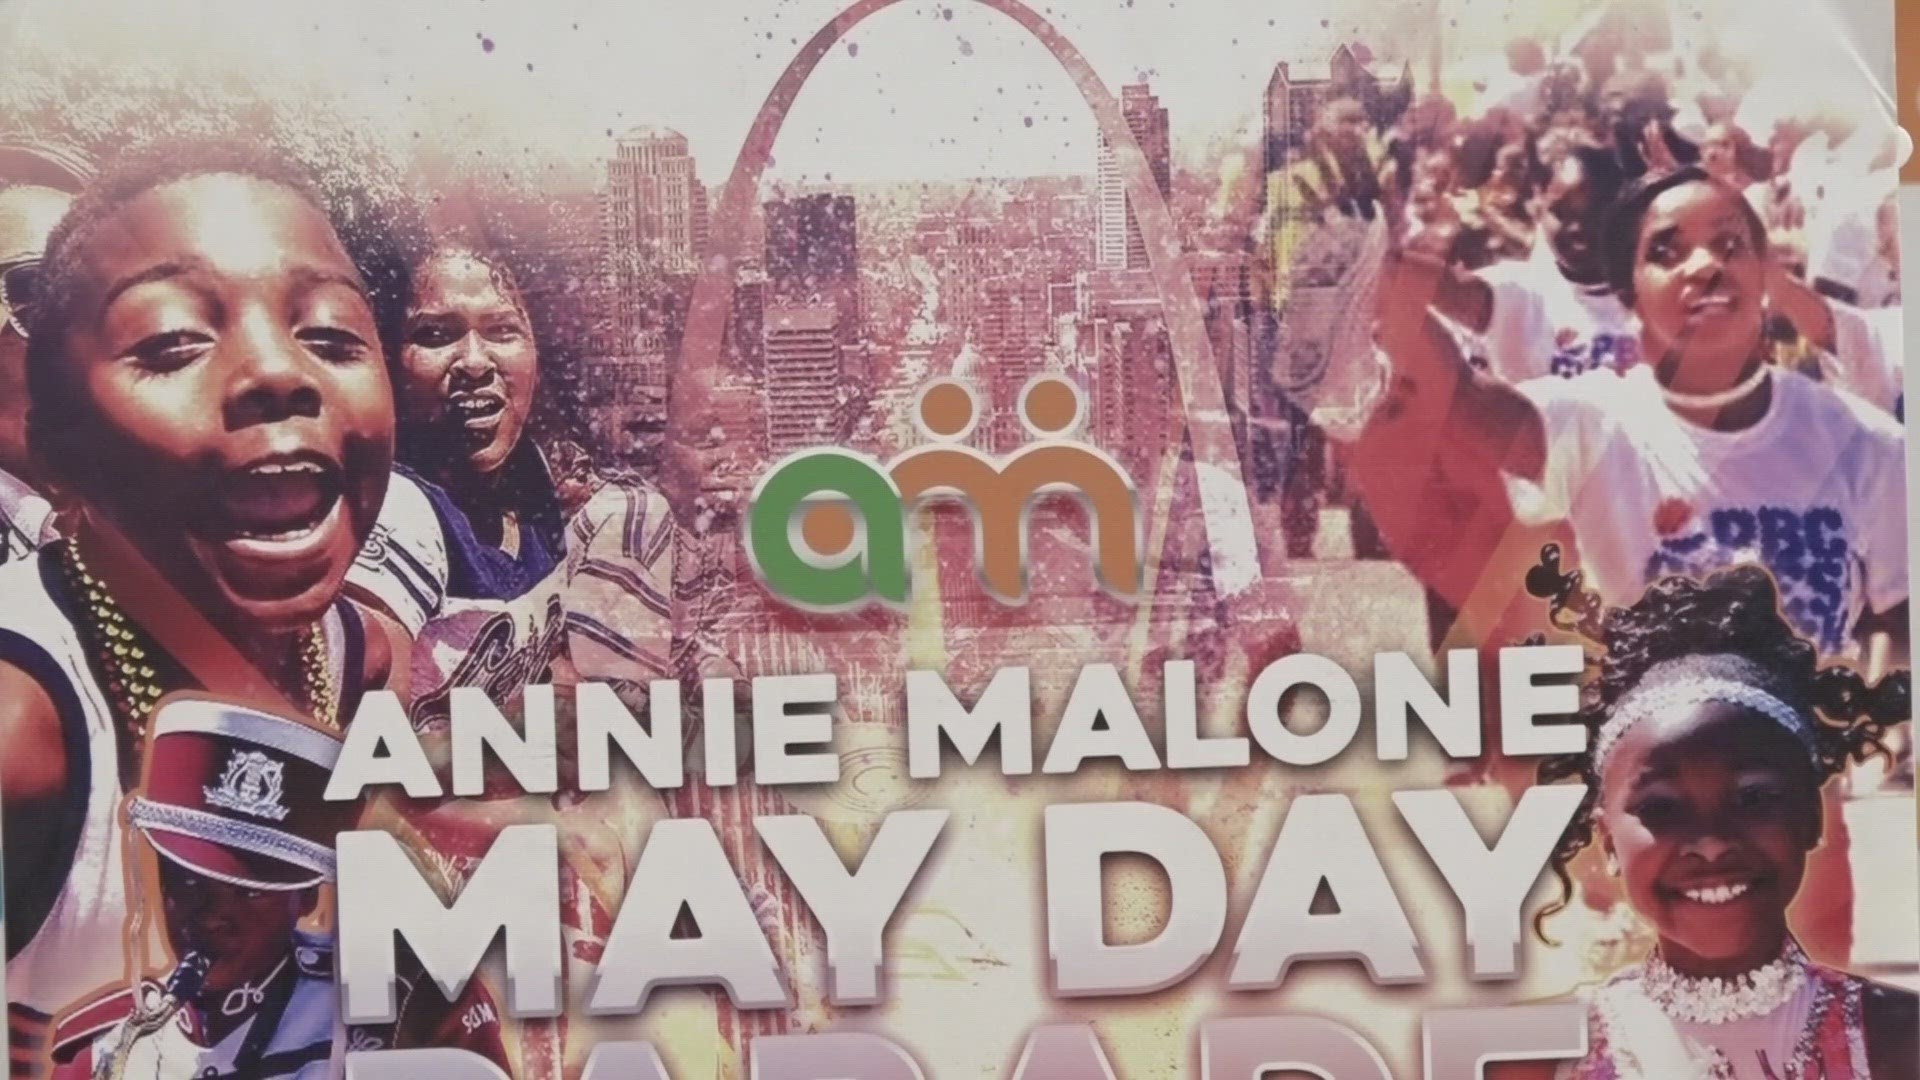 Officials with the Annie Malone organization announced their annual May Day Parade Friday morning.